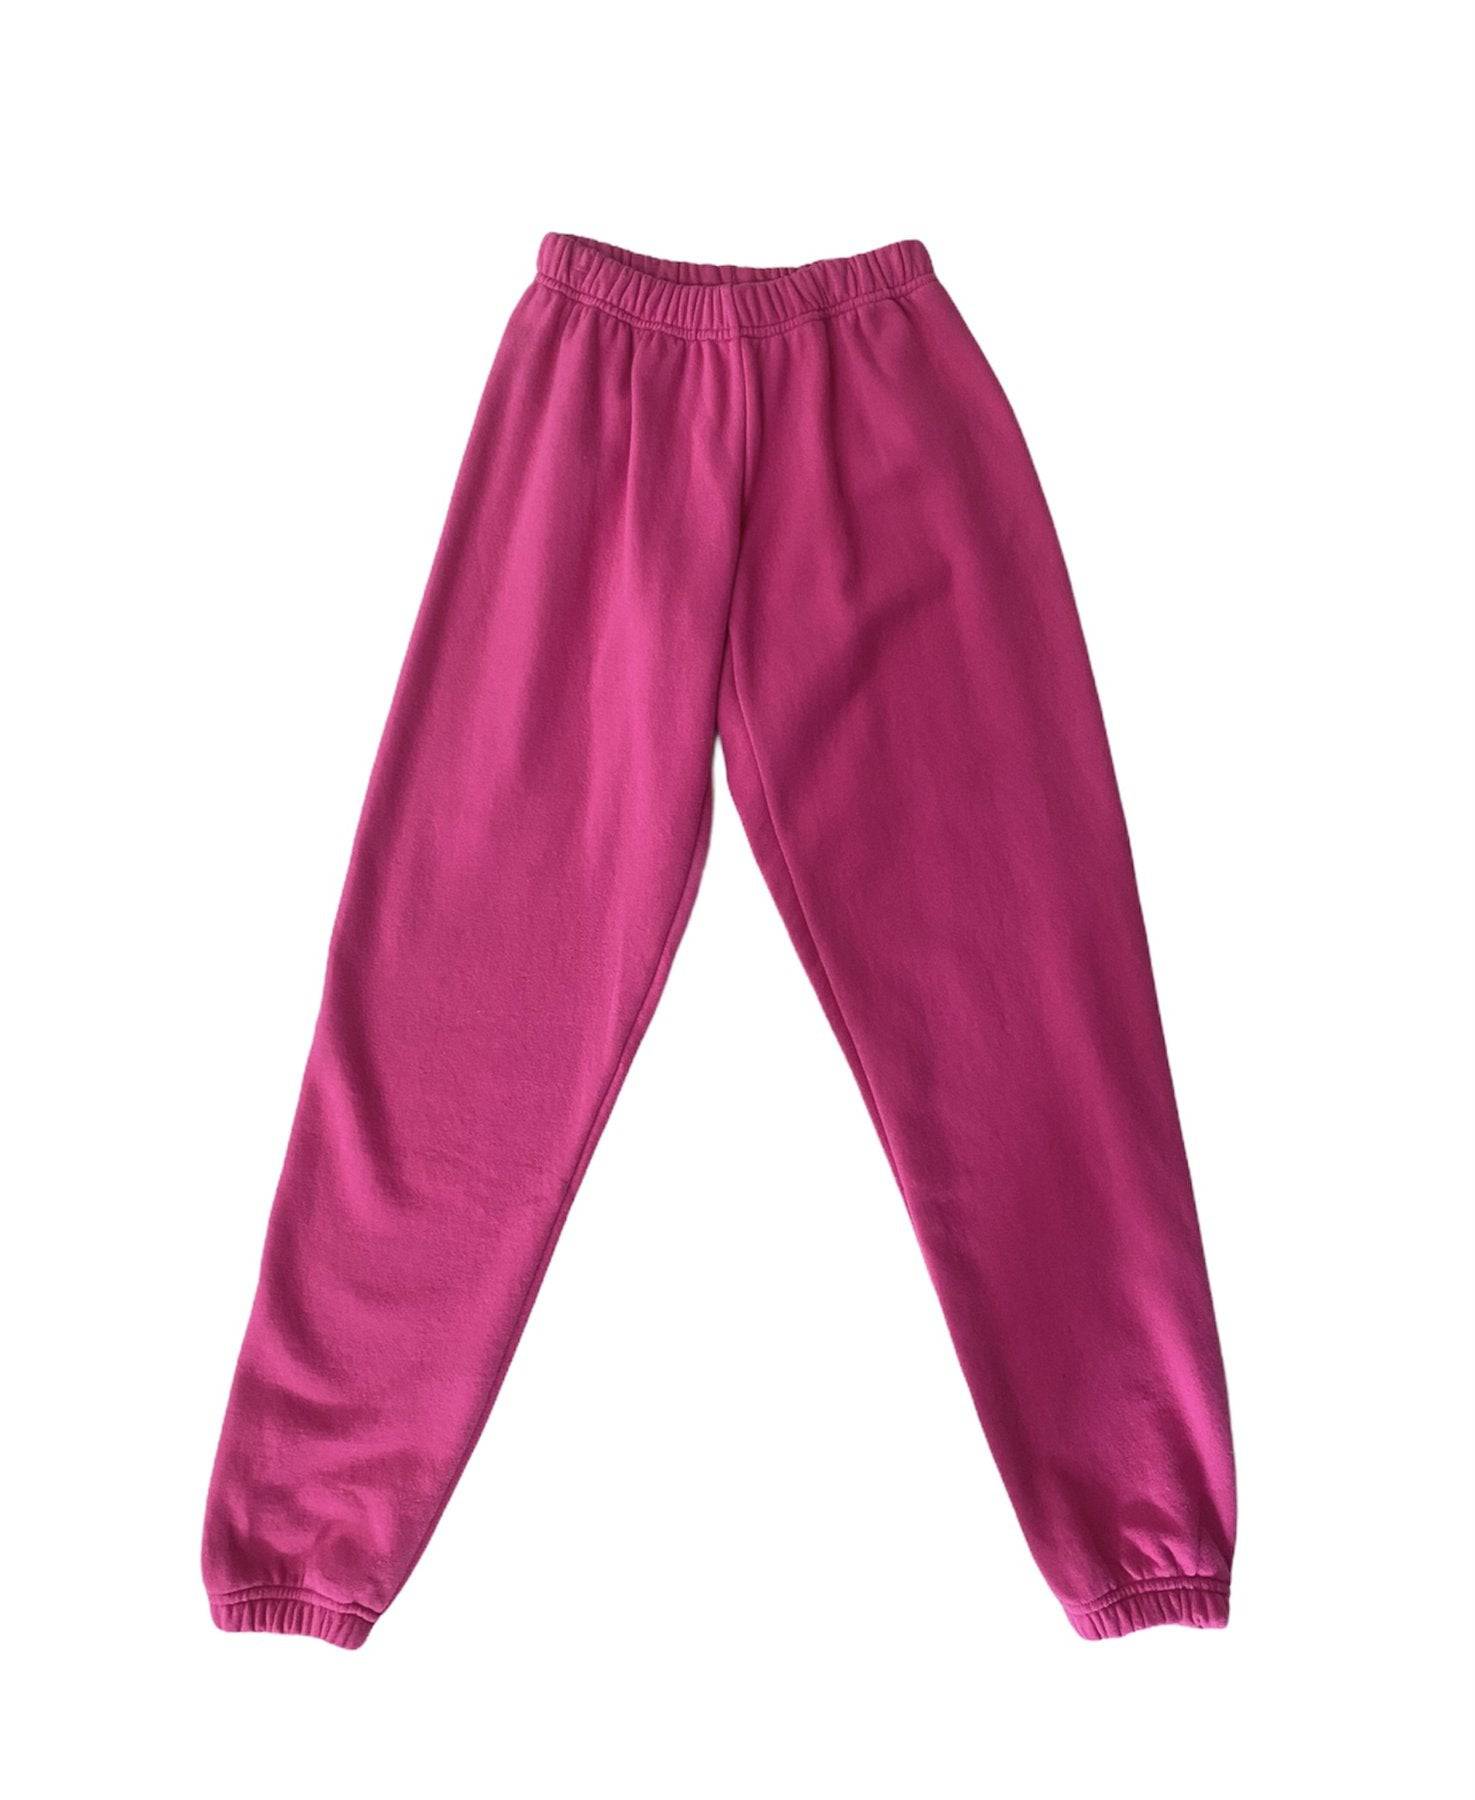 Dylan Pant - Hot Pink - Twinkle Twinkle Little One